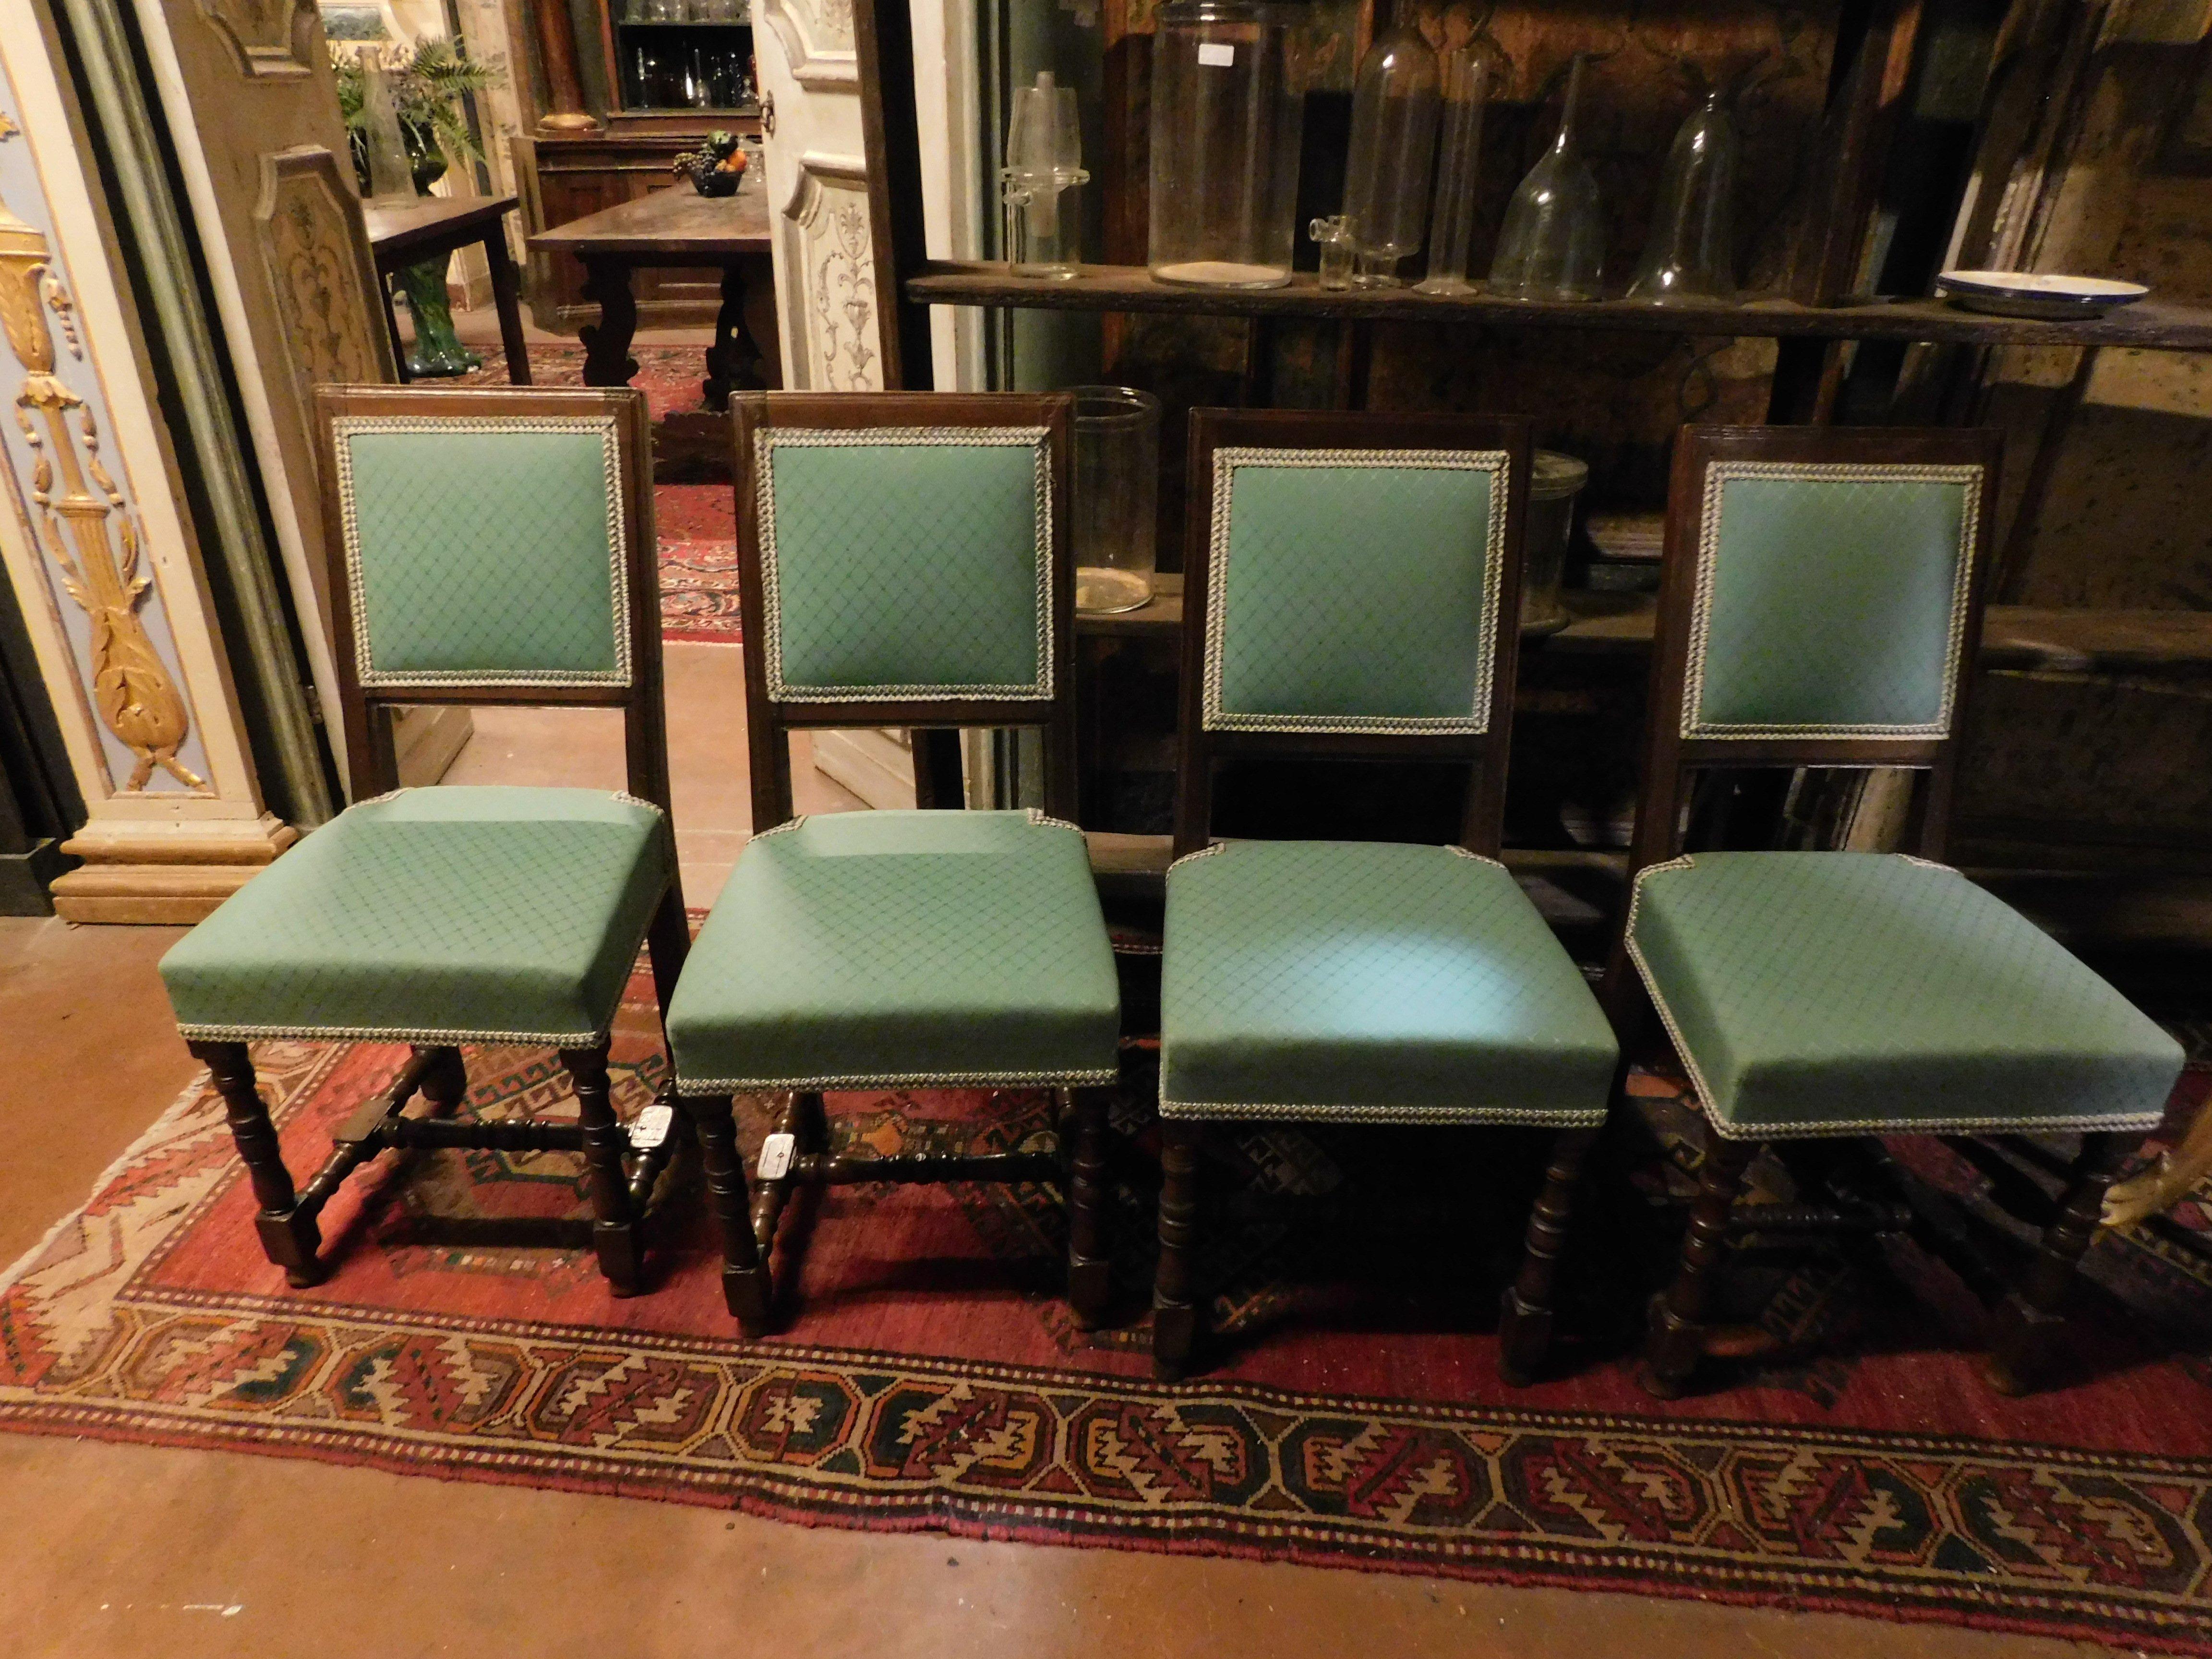 Antique and rare set of 4 walnut chairs, hand-carved with spool type, green/blue upholstery replaced new, original from the 1600s, coming from an Italian residence, excellent as a dining set, perhaps around a modern table in contrast, measures L 45